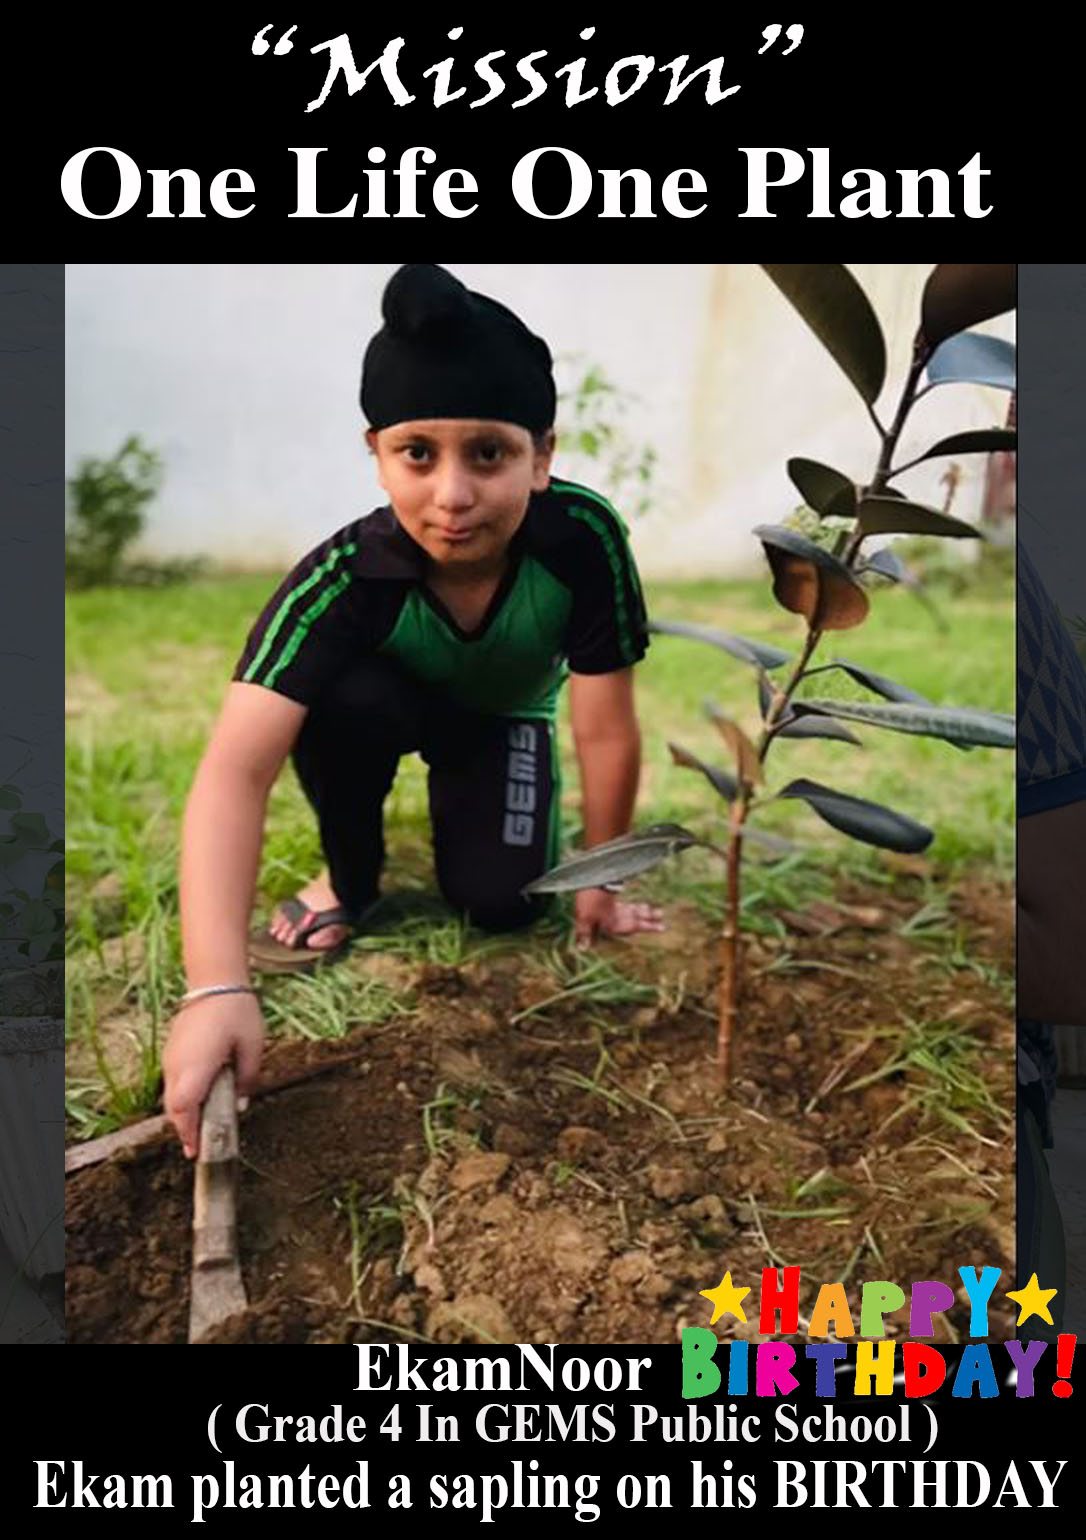 Mission “One Life One Plant” Ekamnoor of grade 4 planted a sapling on his BIRTHDAY